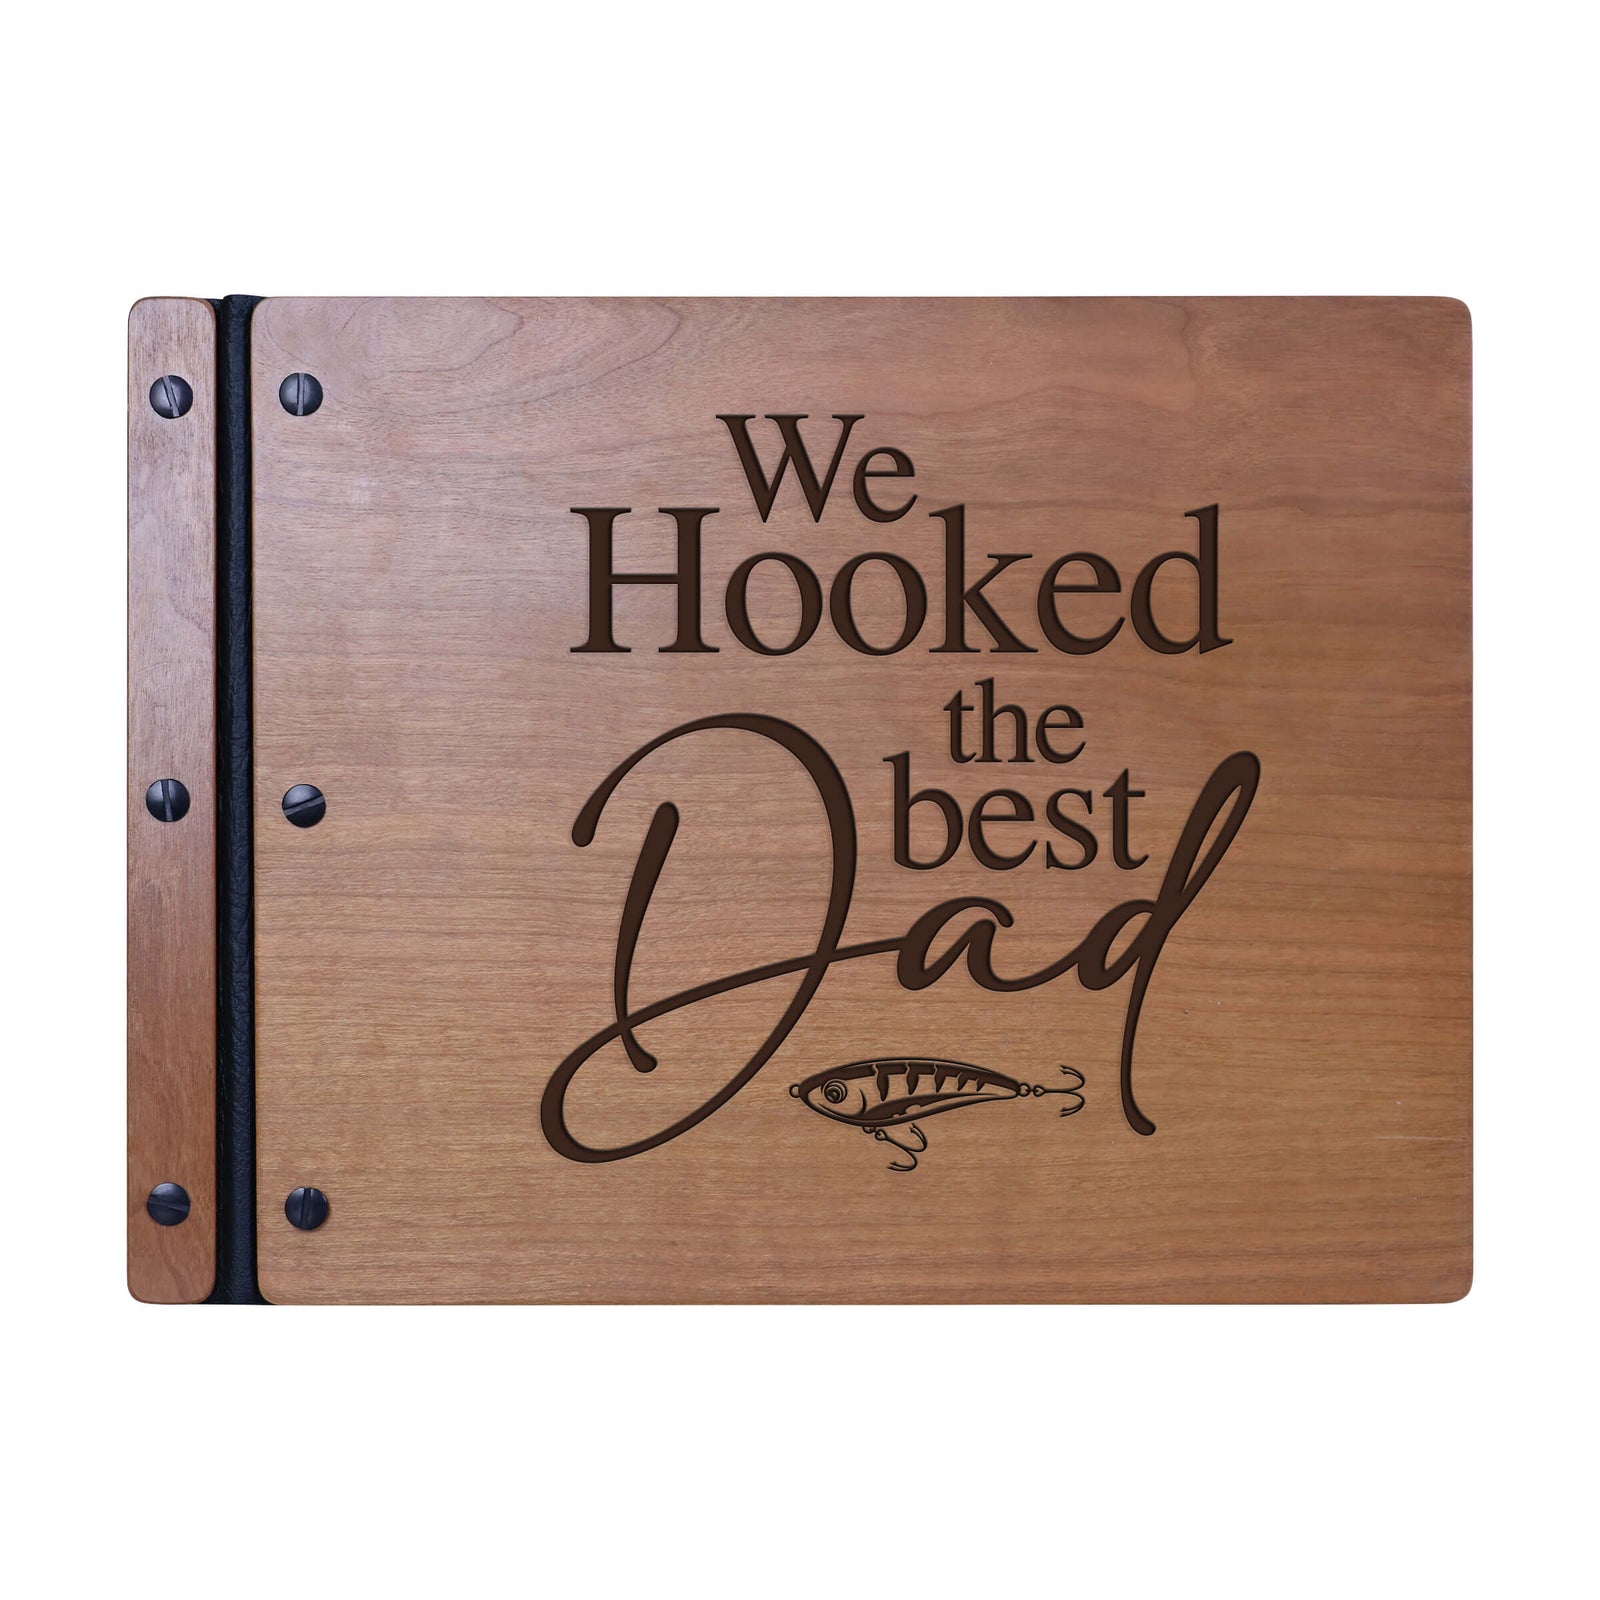 Wooden Memorial Large Guestbook with Fisherman Verse for Funeral Service - The BEST Dad